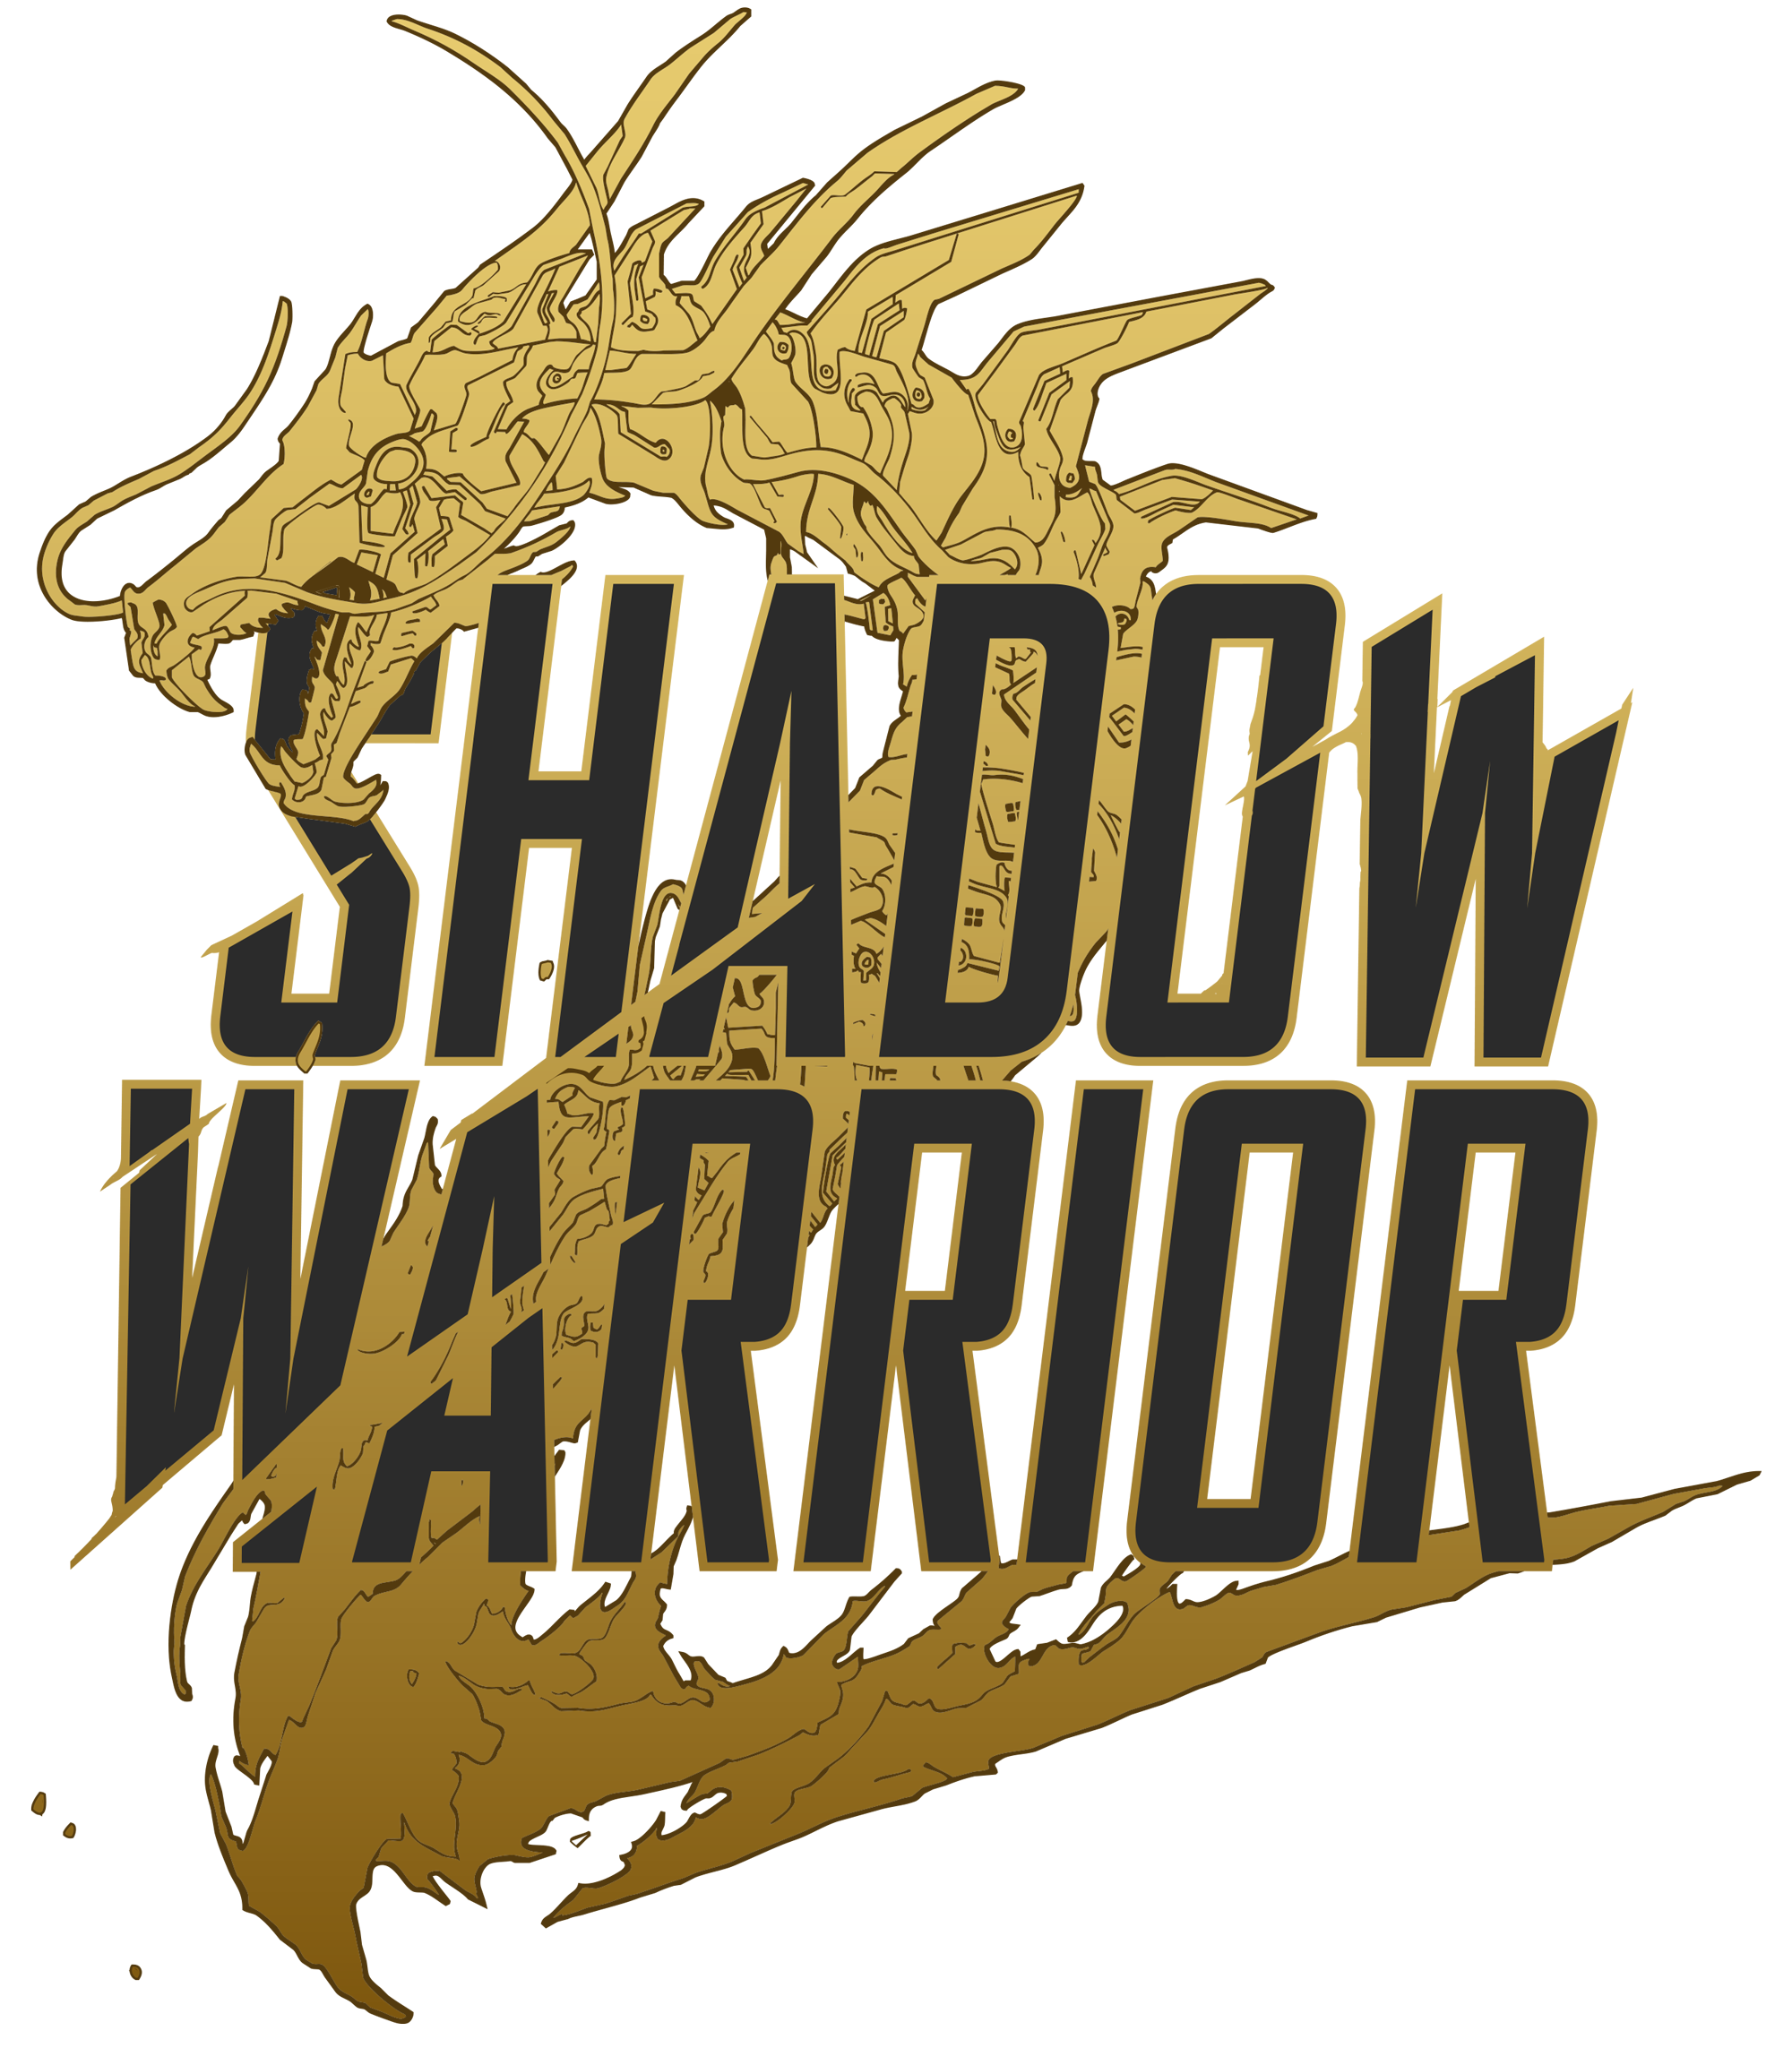 Shadow Warrior 2 Backgrounds, Compatible - PC, Mobile, Gadgets| 2000x2286 px